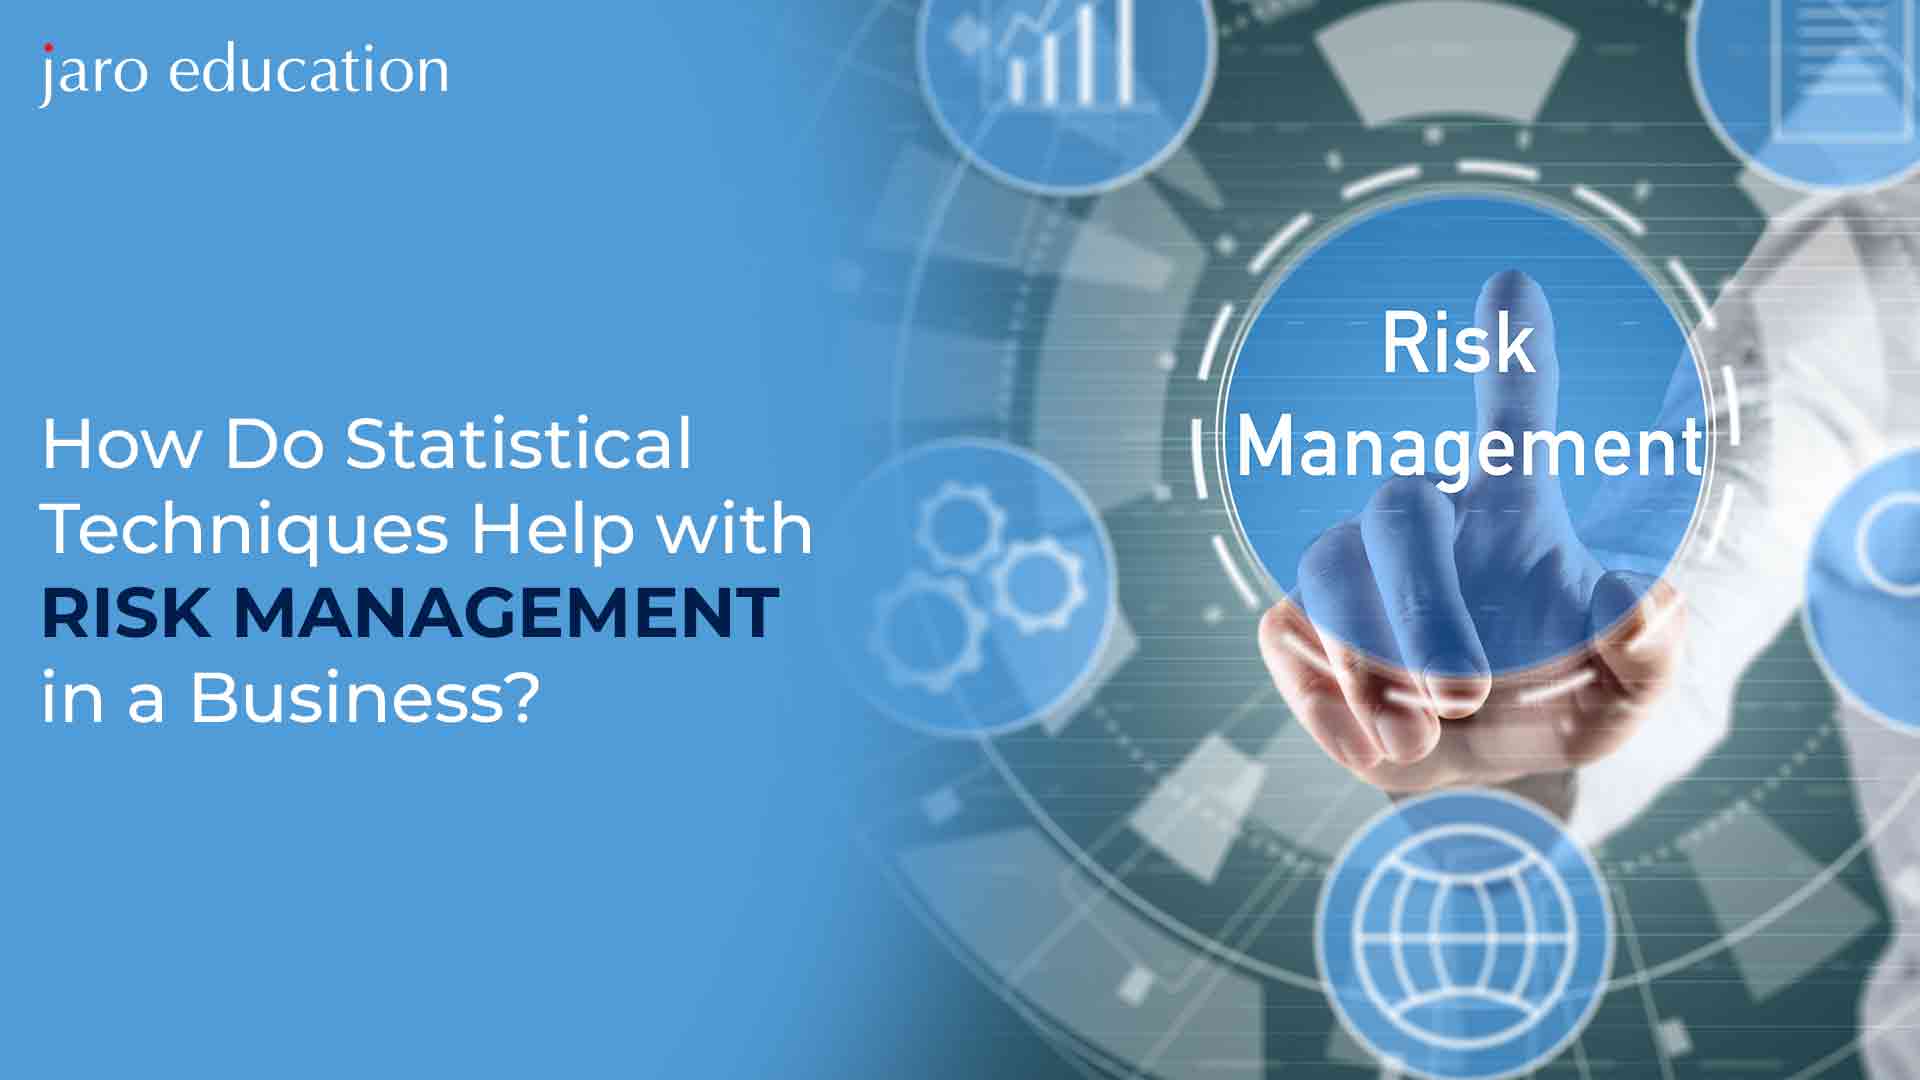 How-Do-Statistical-Techniques-Help-with-Risk-Management-in-a-Business-Jaro